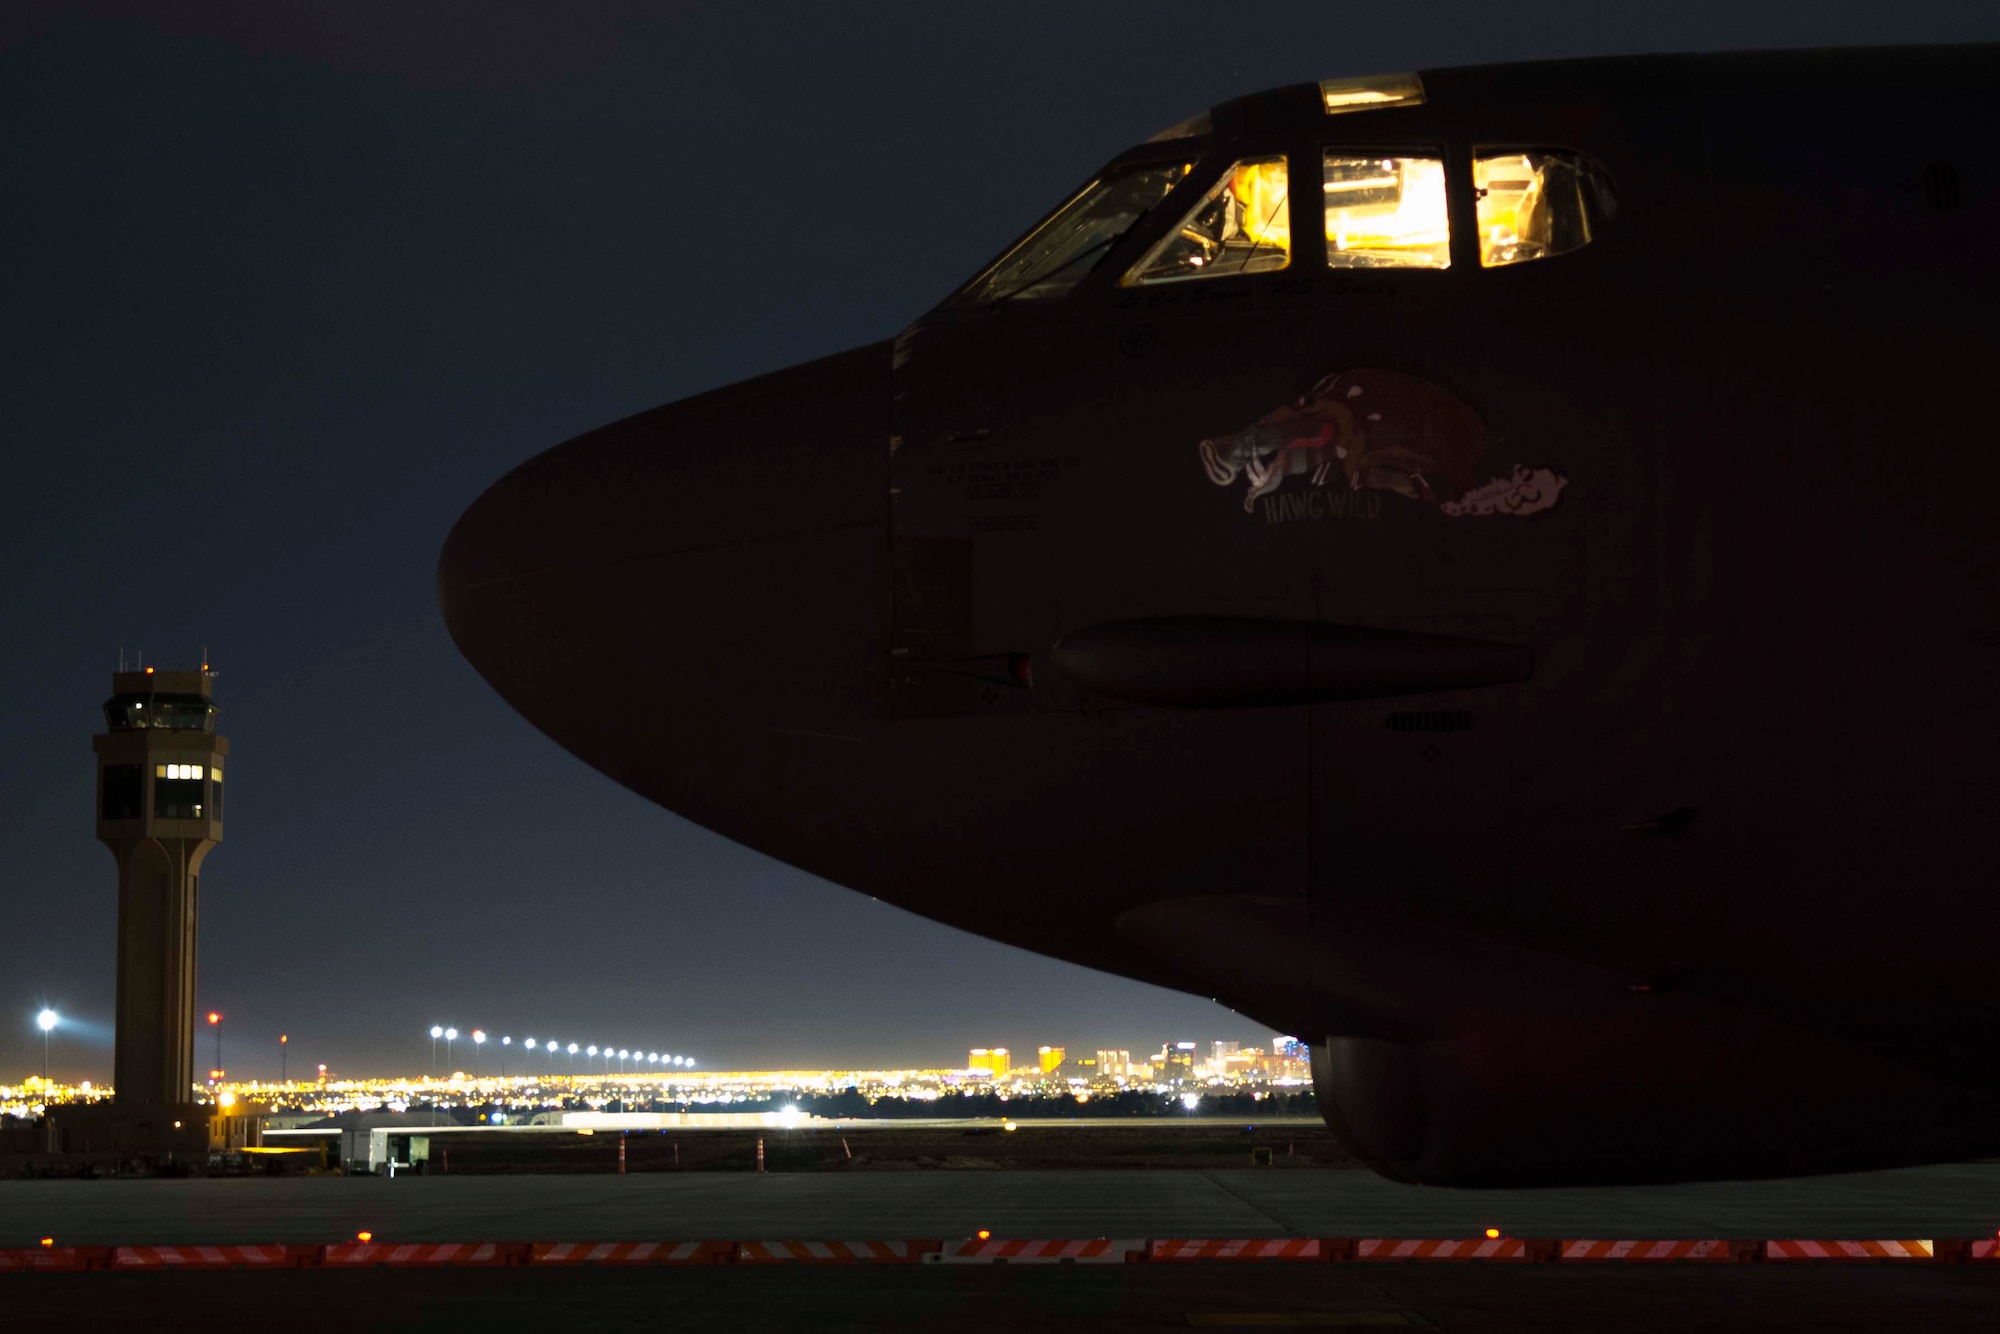 A B-52 Stratofortress undergoes maintenance during the early morning hours of Dec. 12, 2018 at Nellis Air Force Base, Nevada.  Maintainers from the 307th Bomb Wing and 2 BW worked together during the biannual Weapons School Integration exercise to ensure the jets were ready to go.  Although the Airmen regularly work together at Barksdale AFB, the WSINT provided them war time scenarios in which to practice the total force integration model. (U.S. Air Force photo by Master Sgt. Ted Daigle)